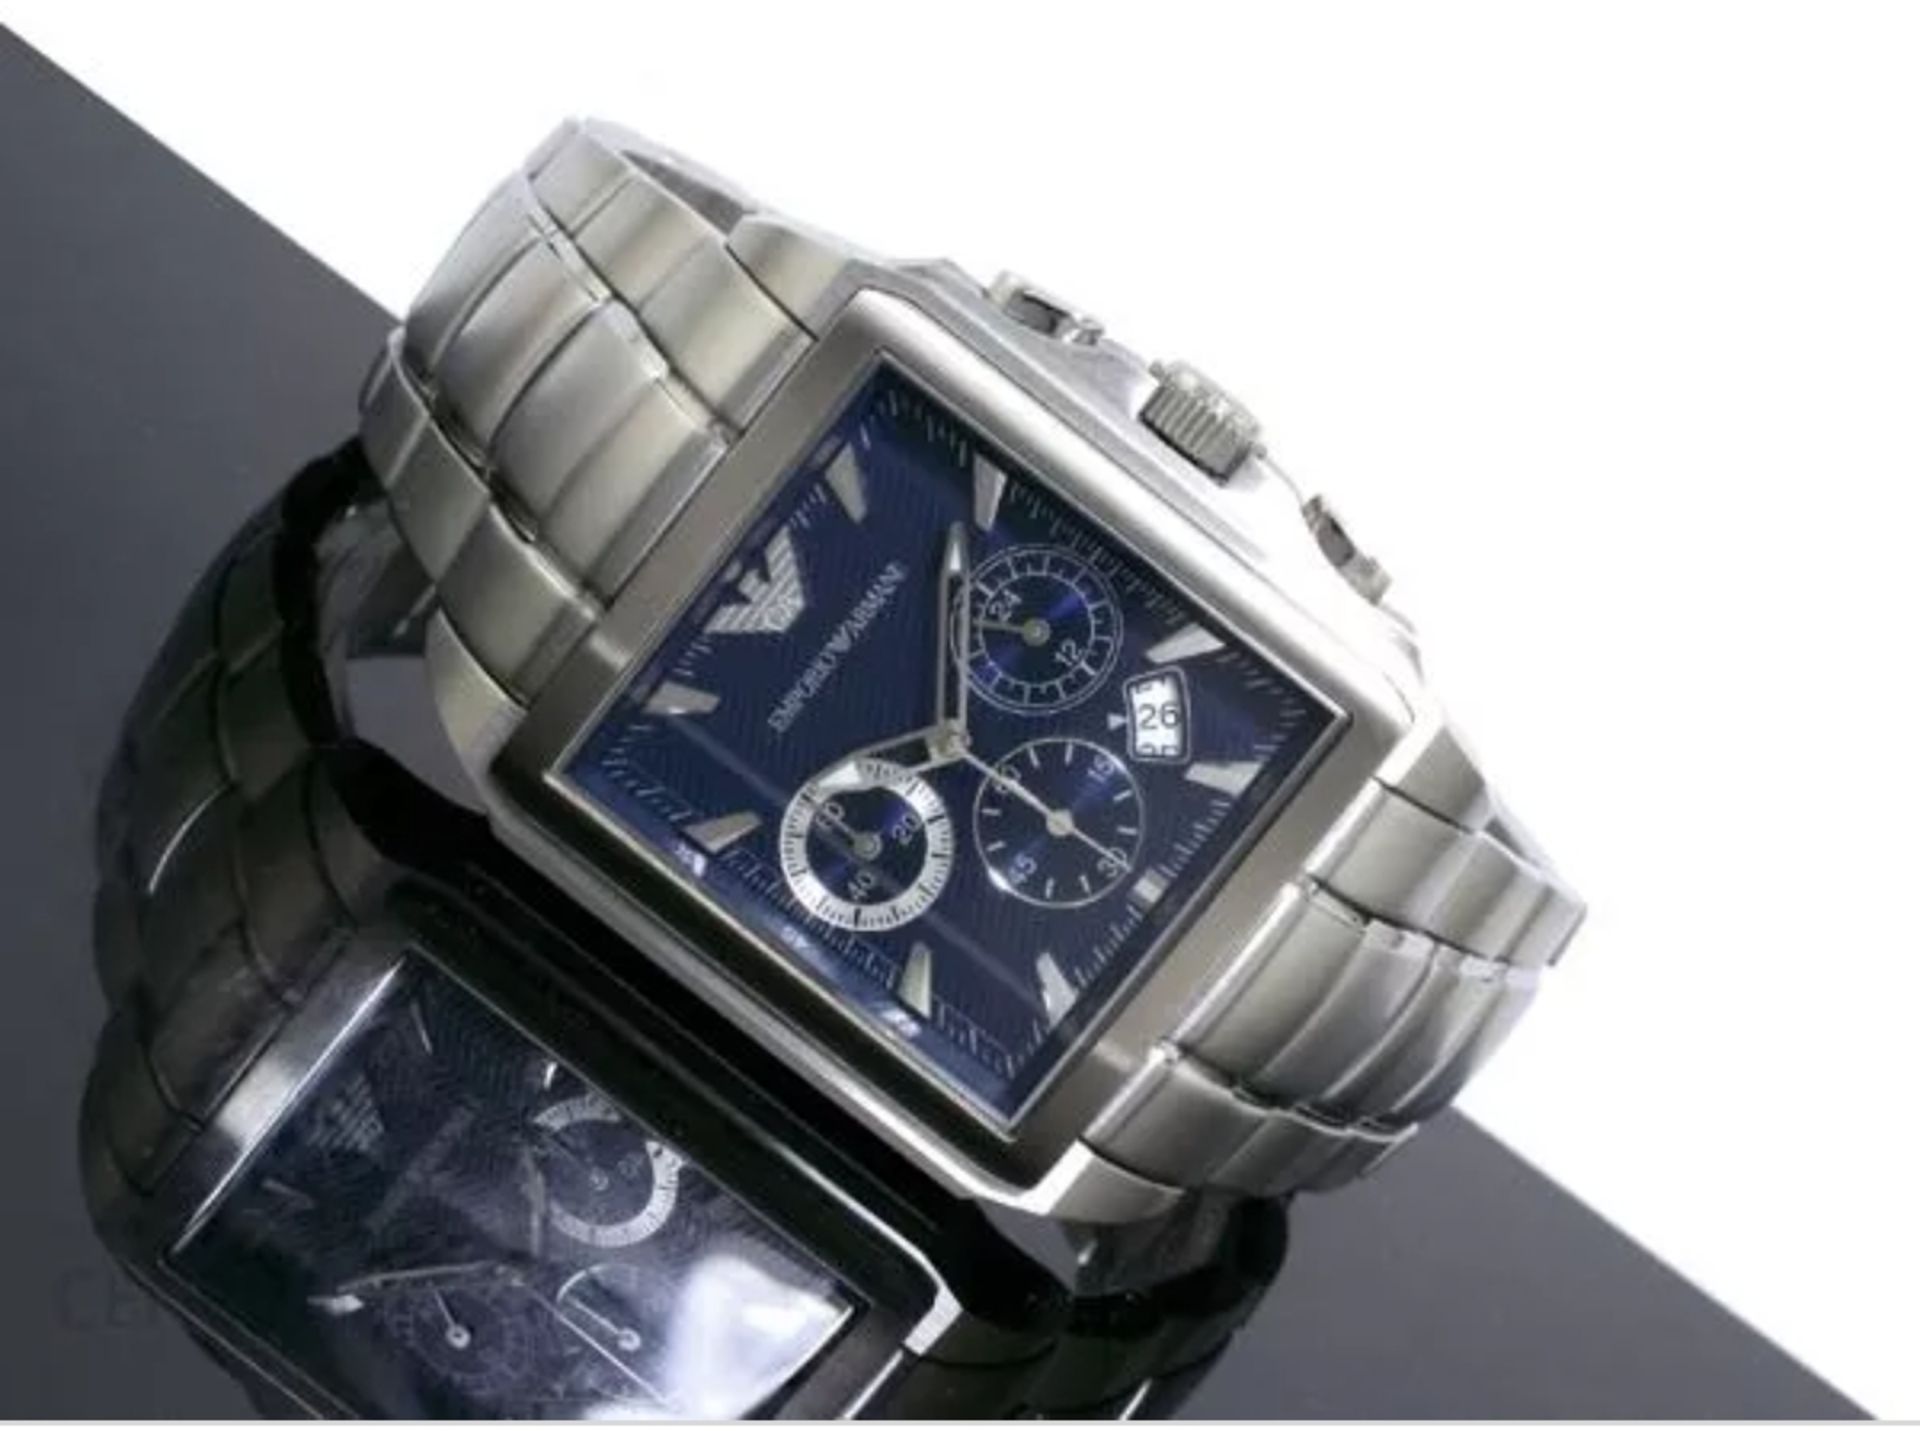 Emporio Armani AR0660 Men's Square Dial Silver Stainless Steel Bracelet Chronograph Watch - Image 2 of 8